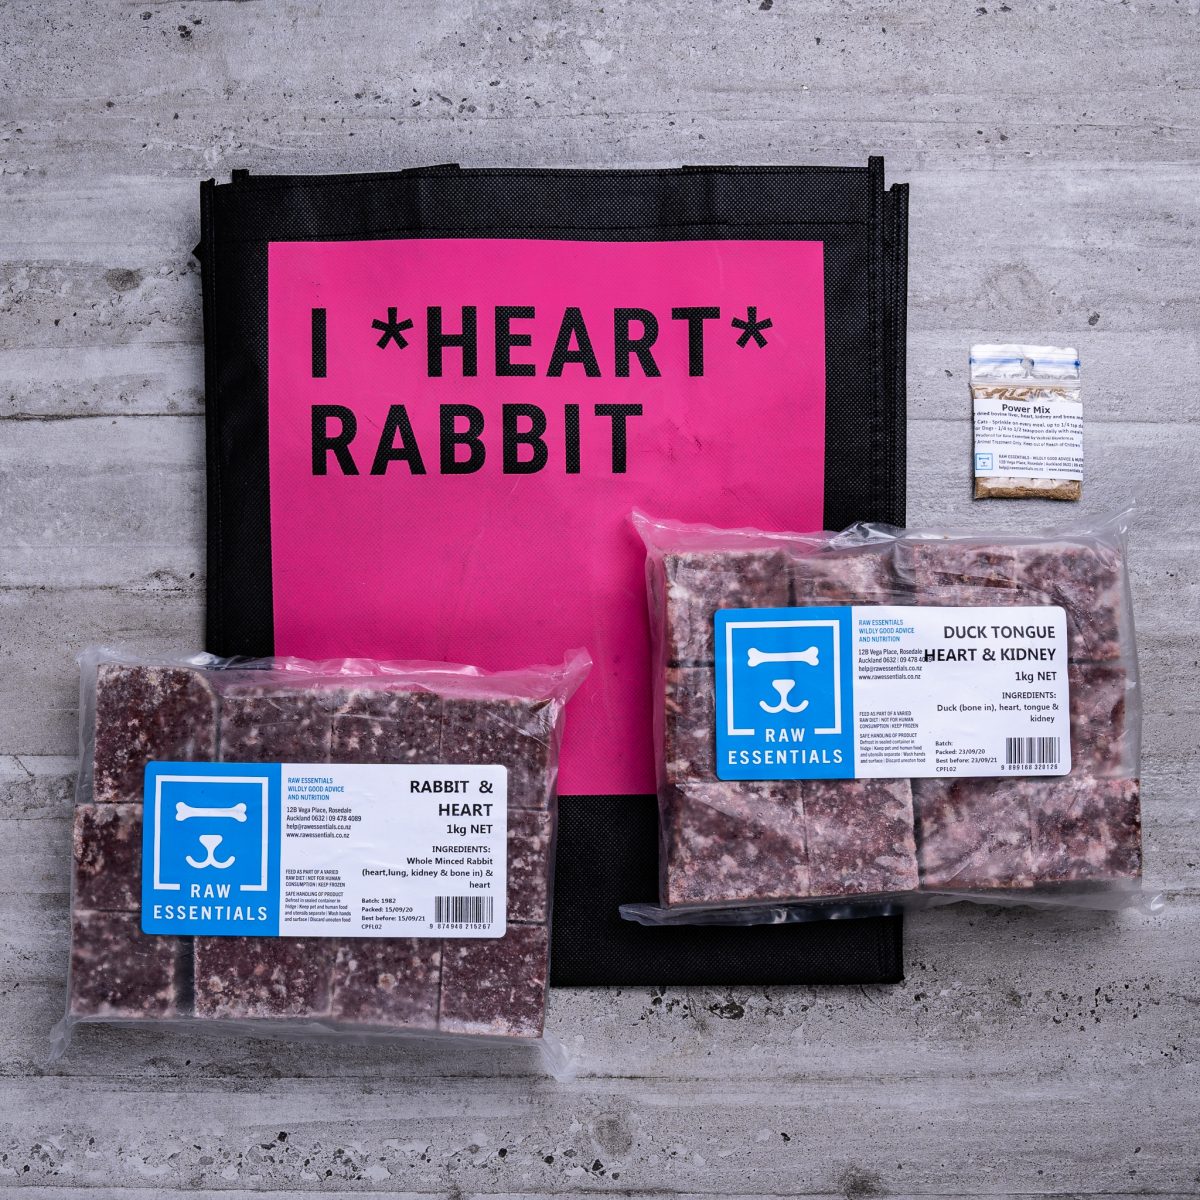 Assortment Of Raw Essential Products For Cats Including, Pink And Black Tote Bag With "I *Heart* Rabbit" Written,  Sample Bag Of Power Mix, 1KG Plastic Pack Of Cubed Rabbit Heart Meat Mix, 1KG Plastic Pack Of Cubed Duck Tongue, Heart And Kidney Meat Mix